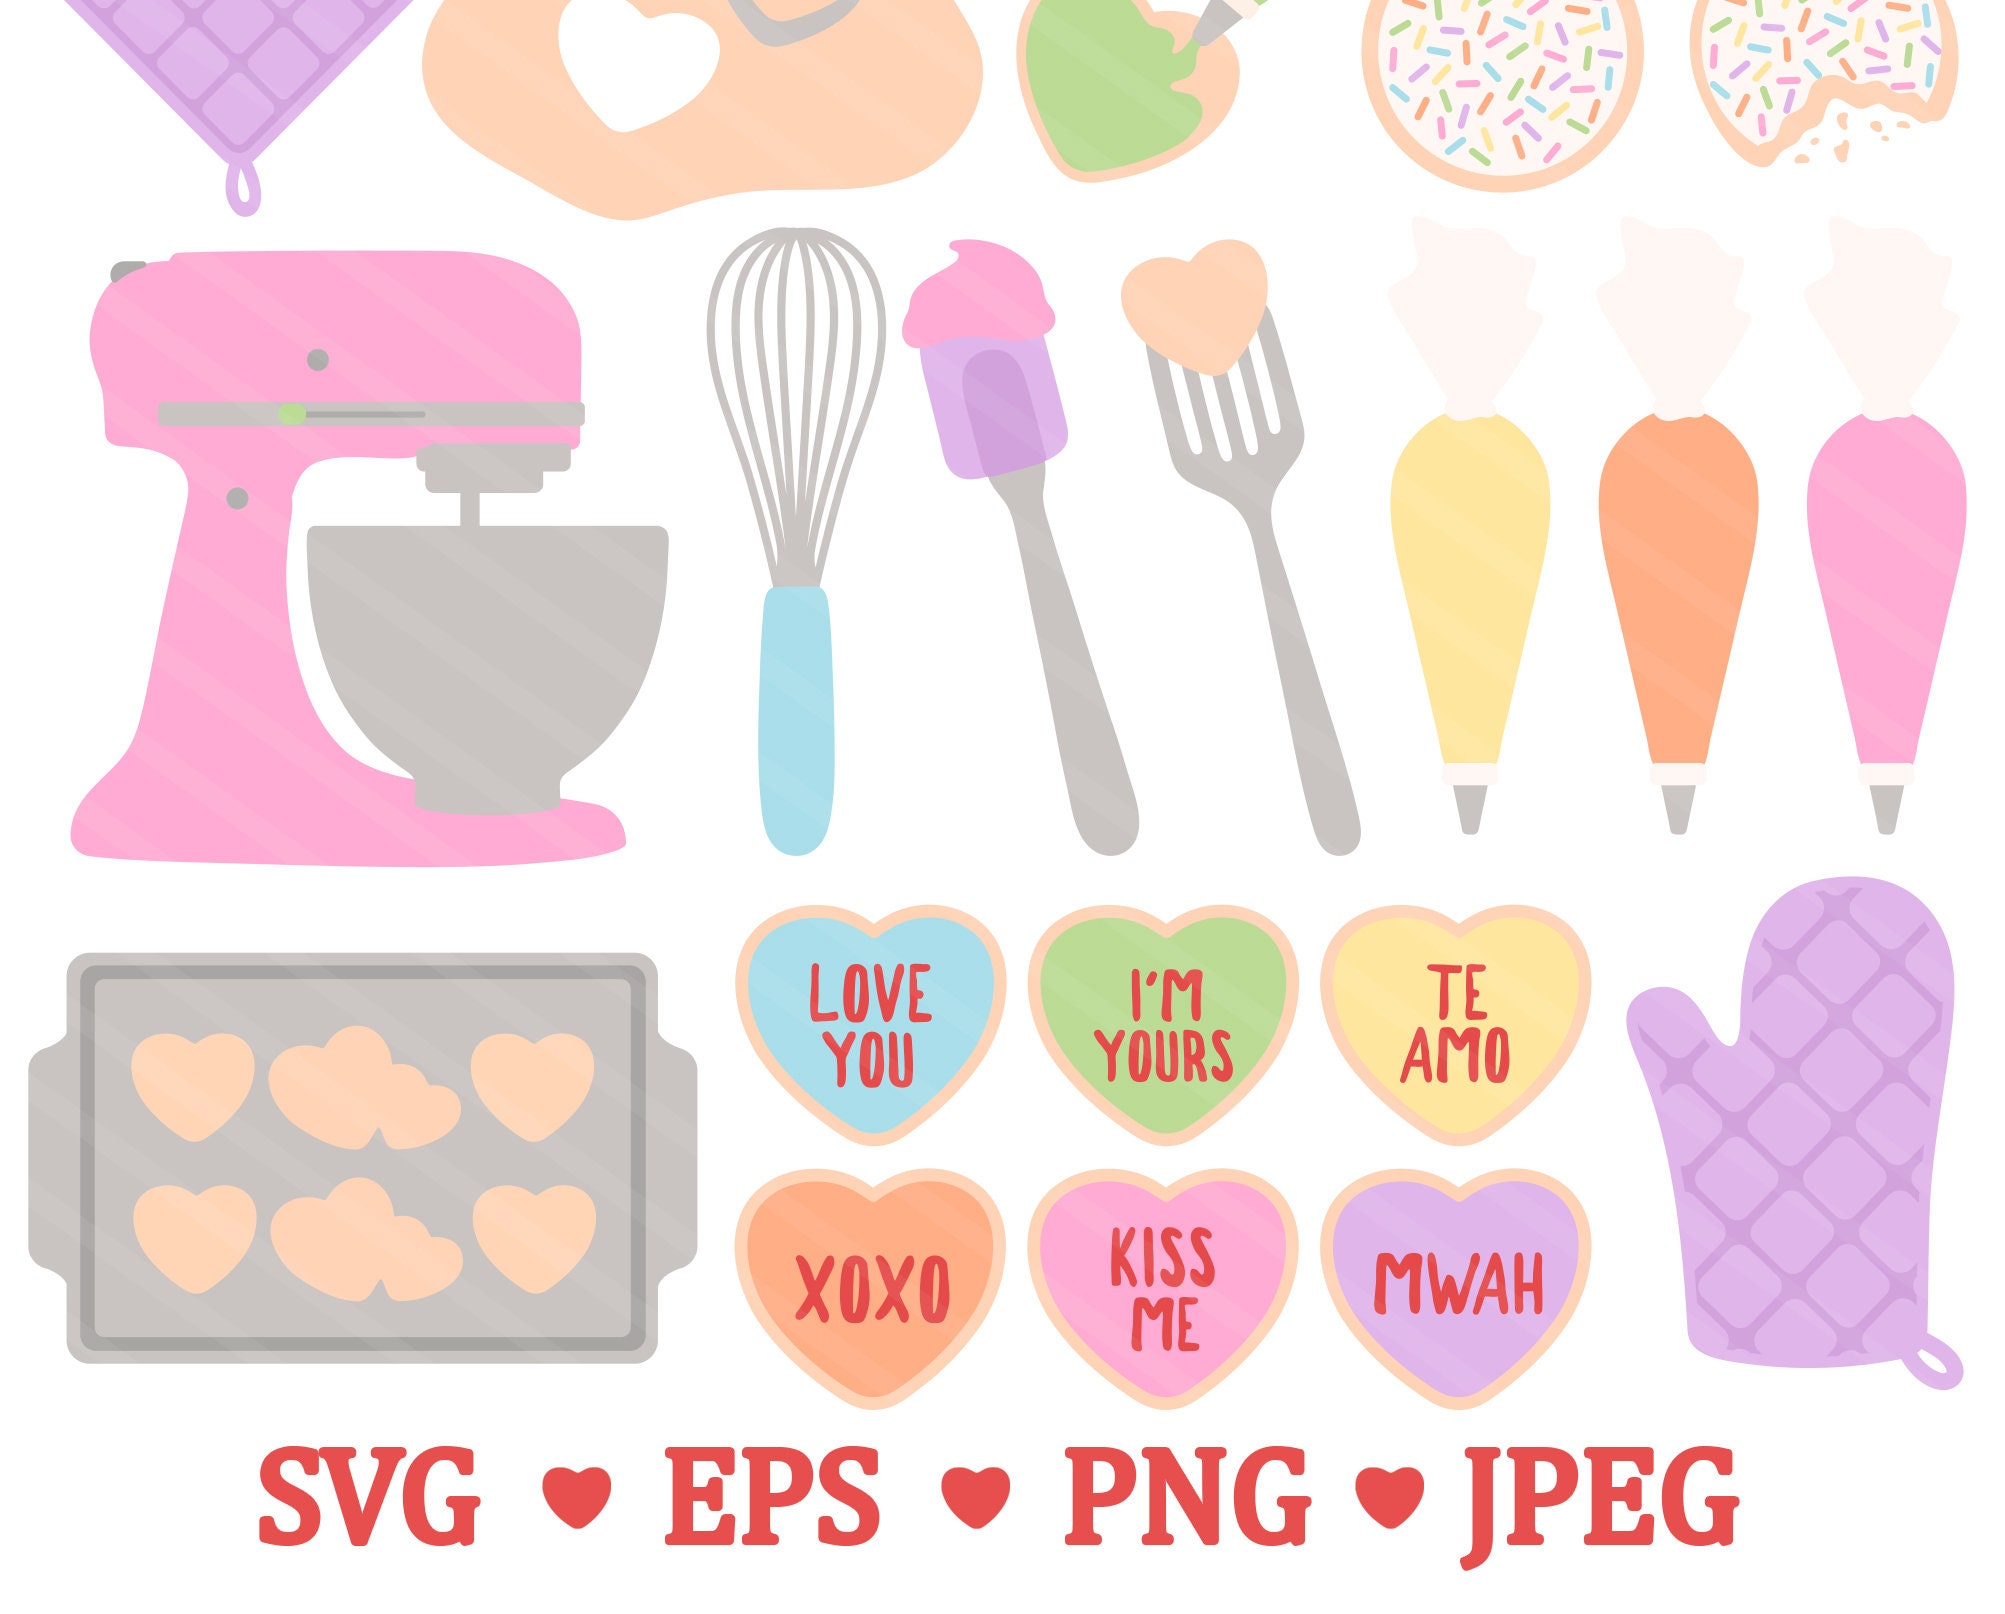 Conversation Heart Clipart Rainbow Valentine Candy Heart, Valentine's Day,  Candy Treat Clip Art for Commercial Use 